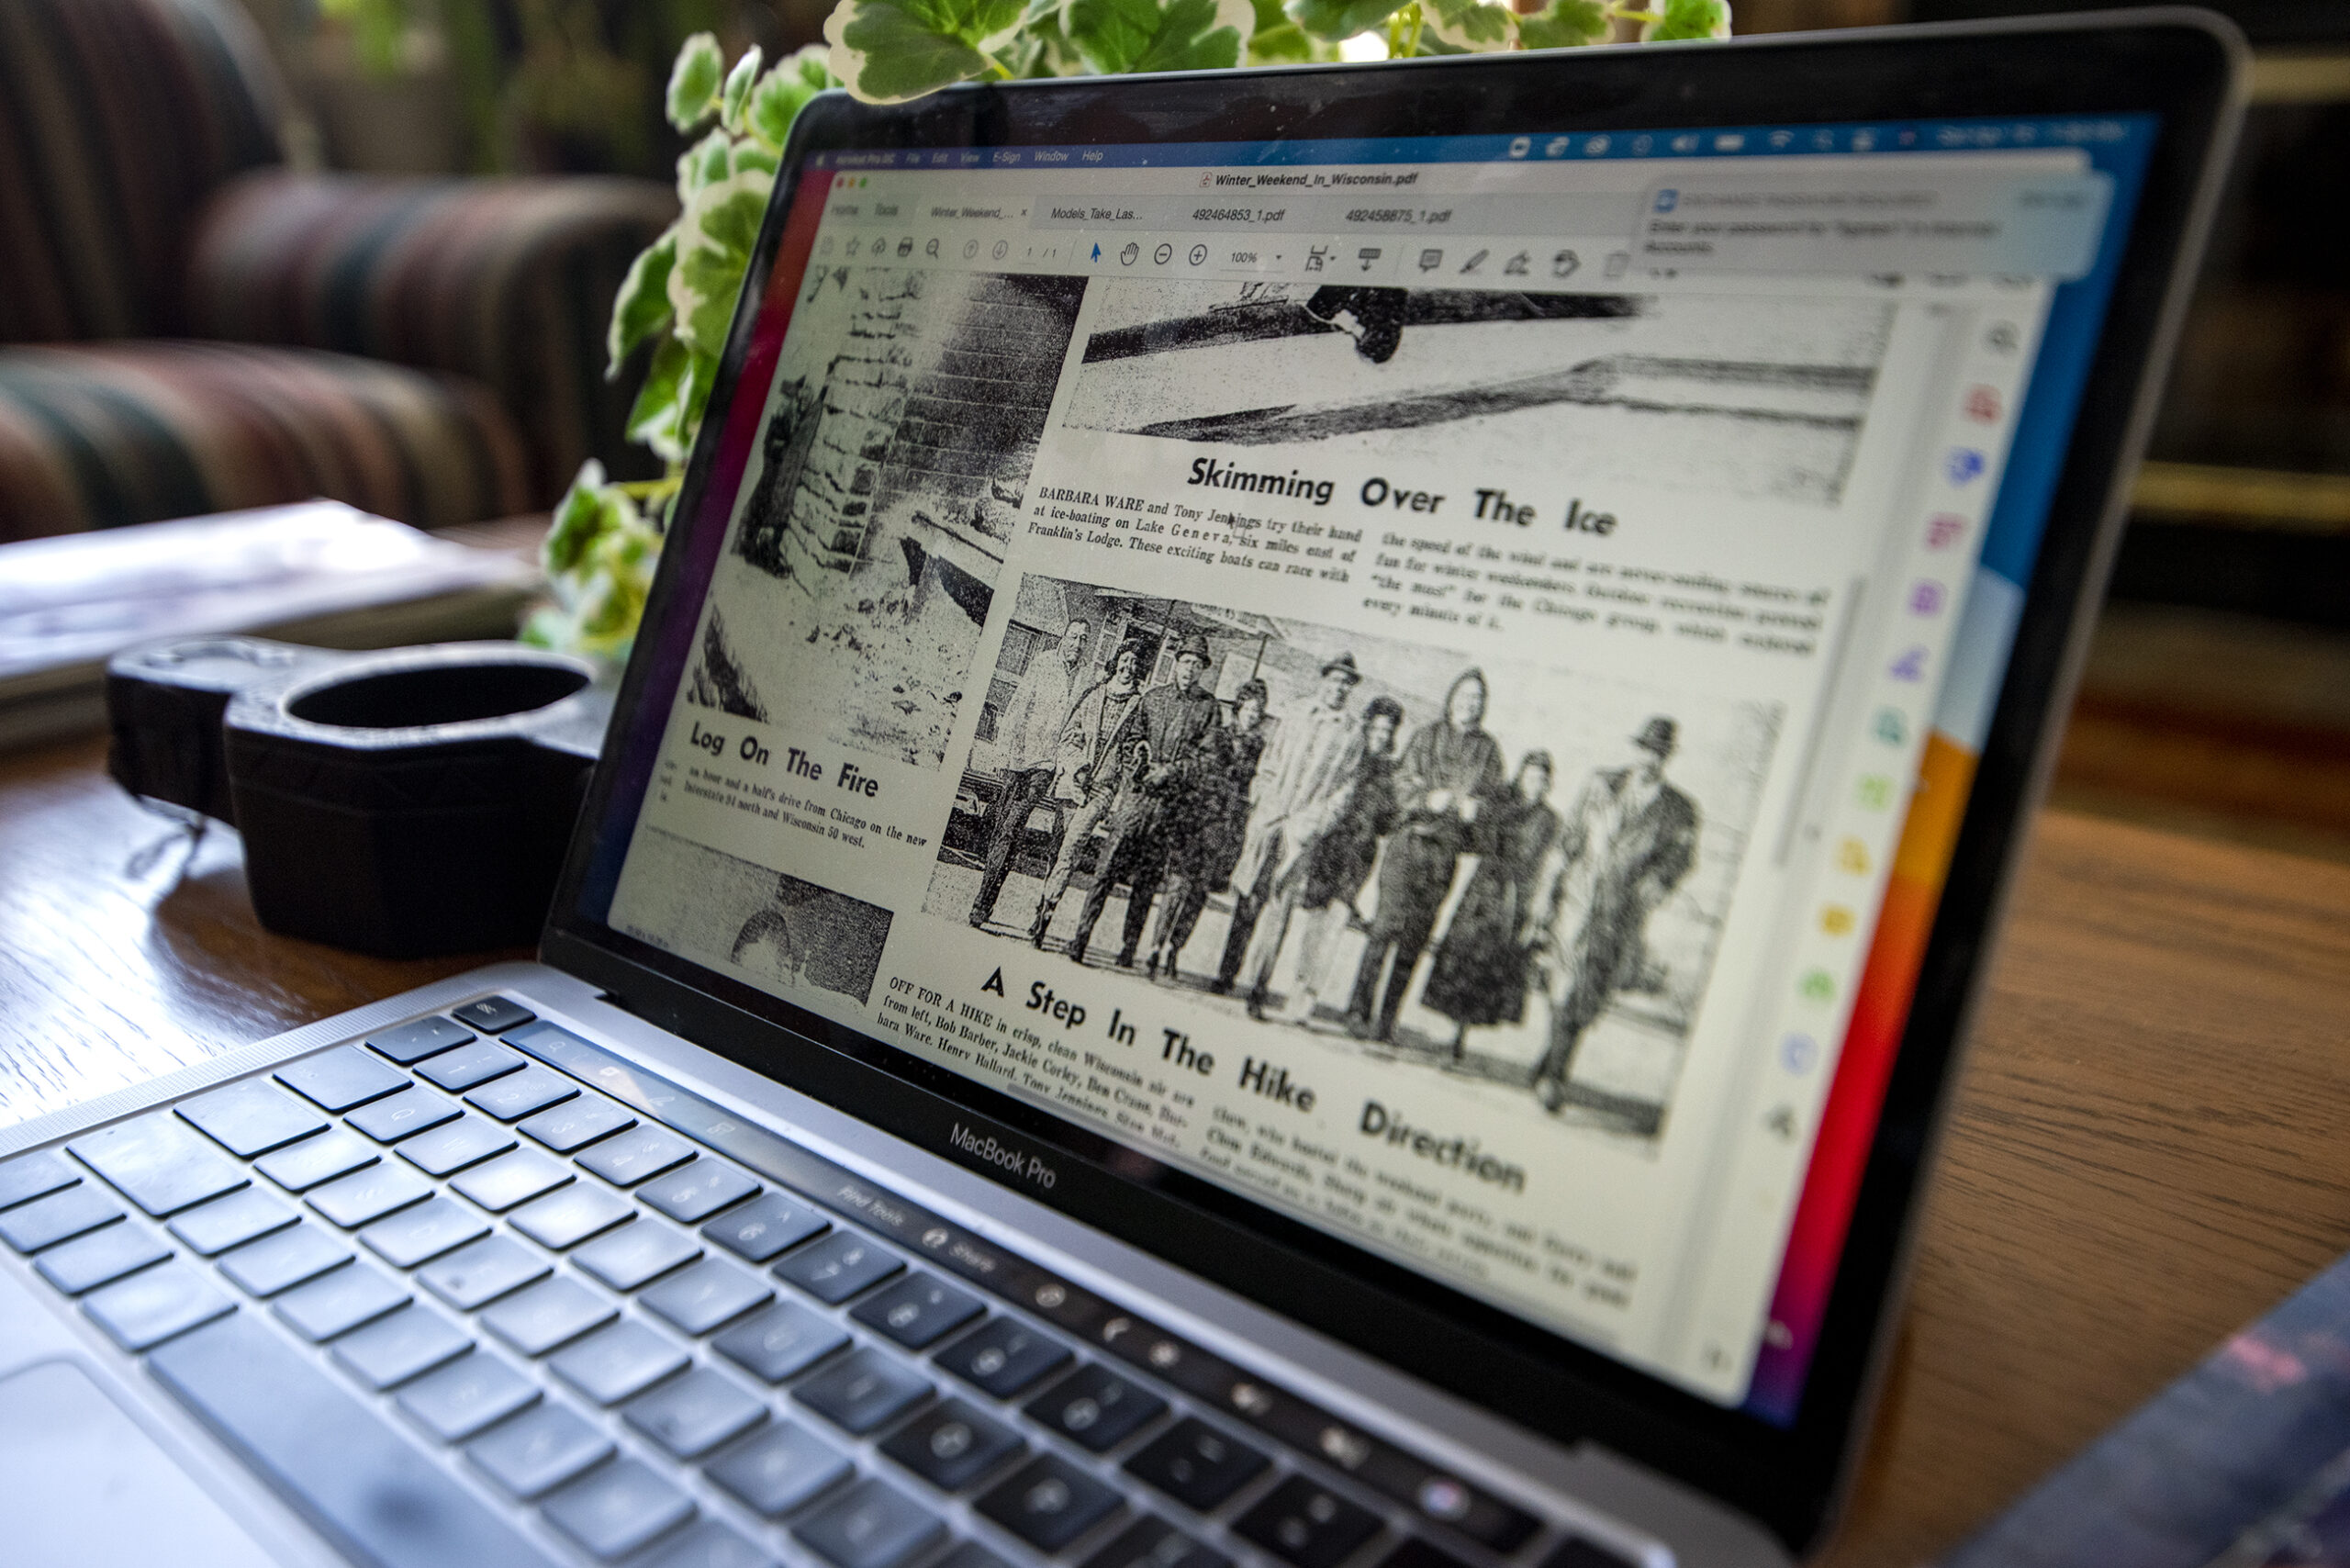 Black and white photographs from a newspaper are seen on a laptop screen.